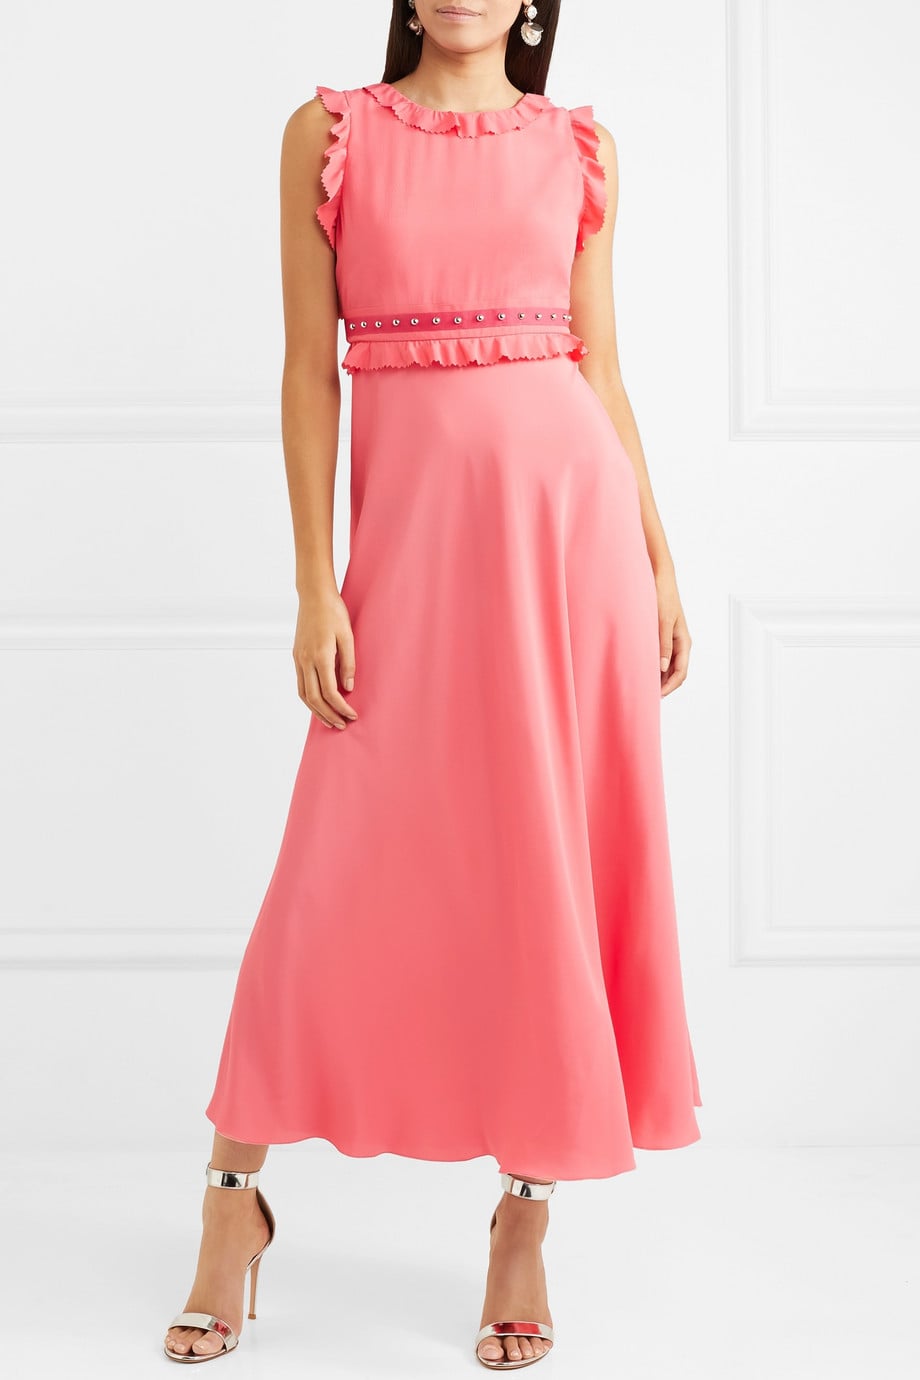 Missguided Lace High Neck Midi Dress, These 28 Dresses Are So Stylish,  You'll Never Believe They're Royal Ascot-Approved